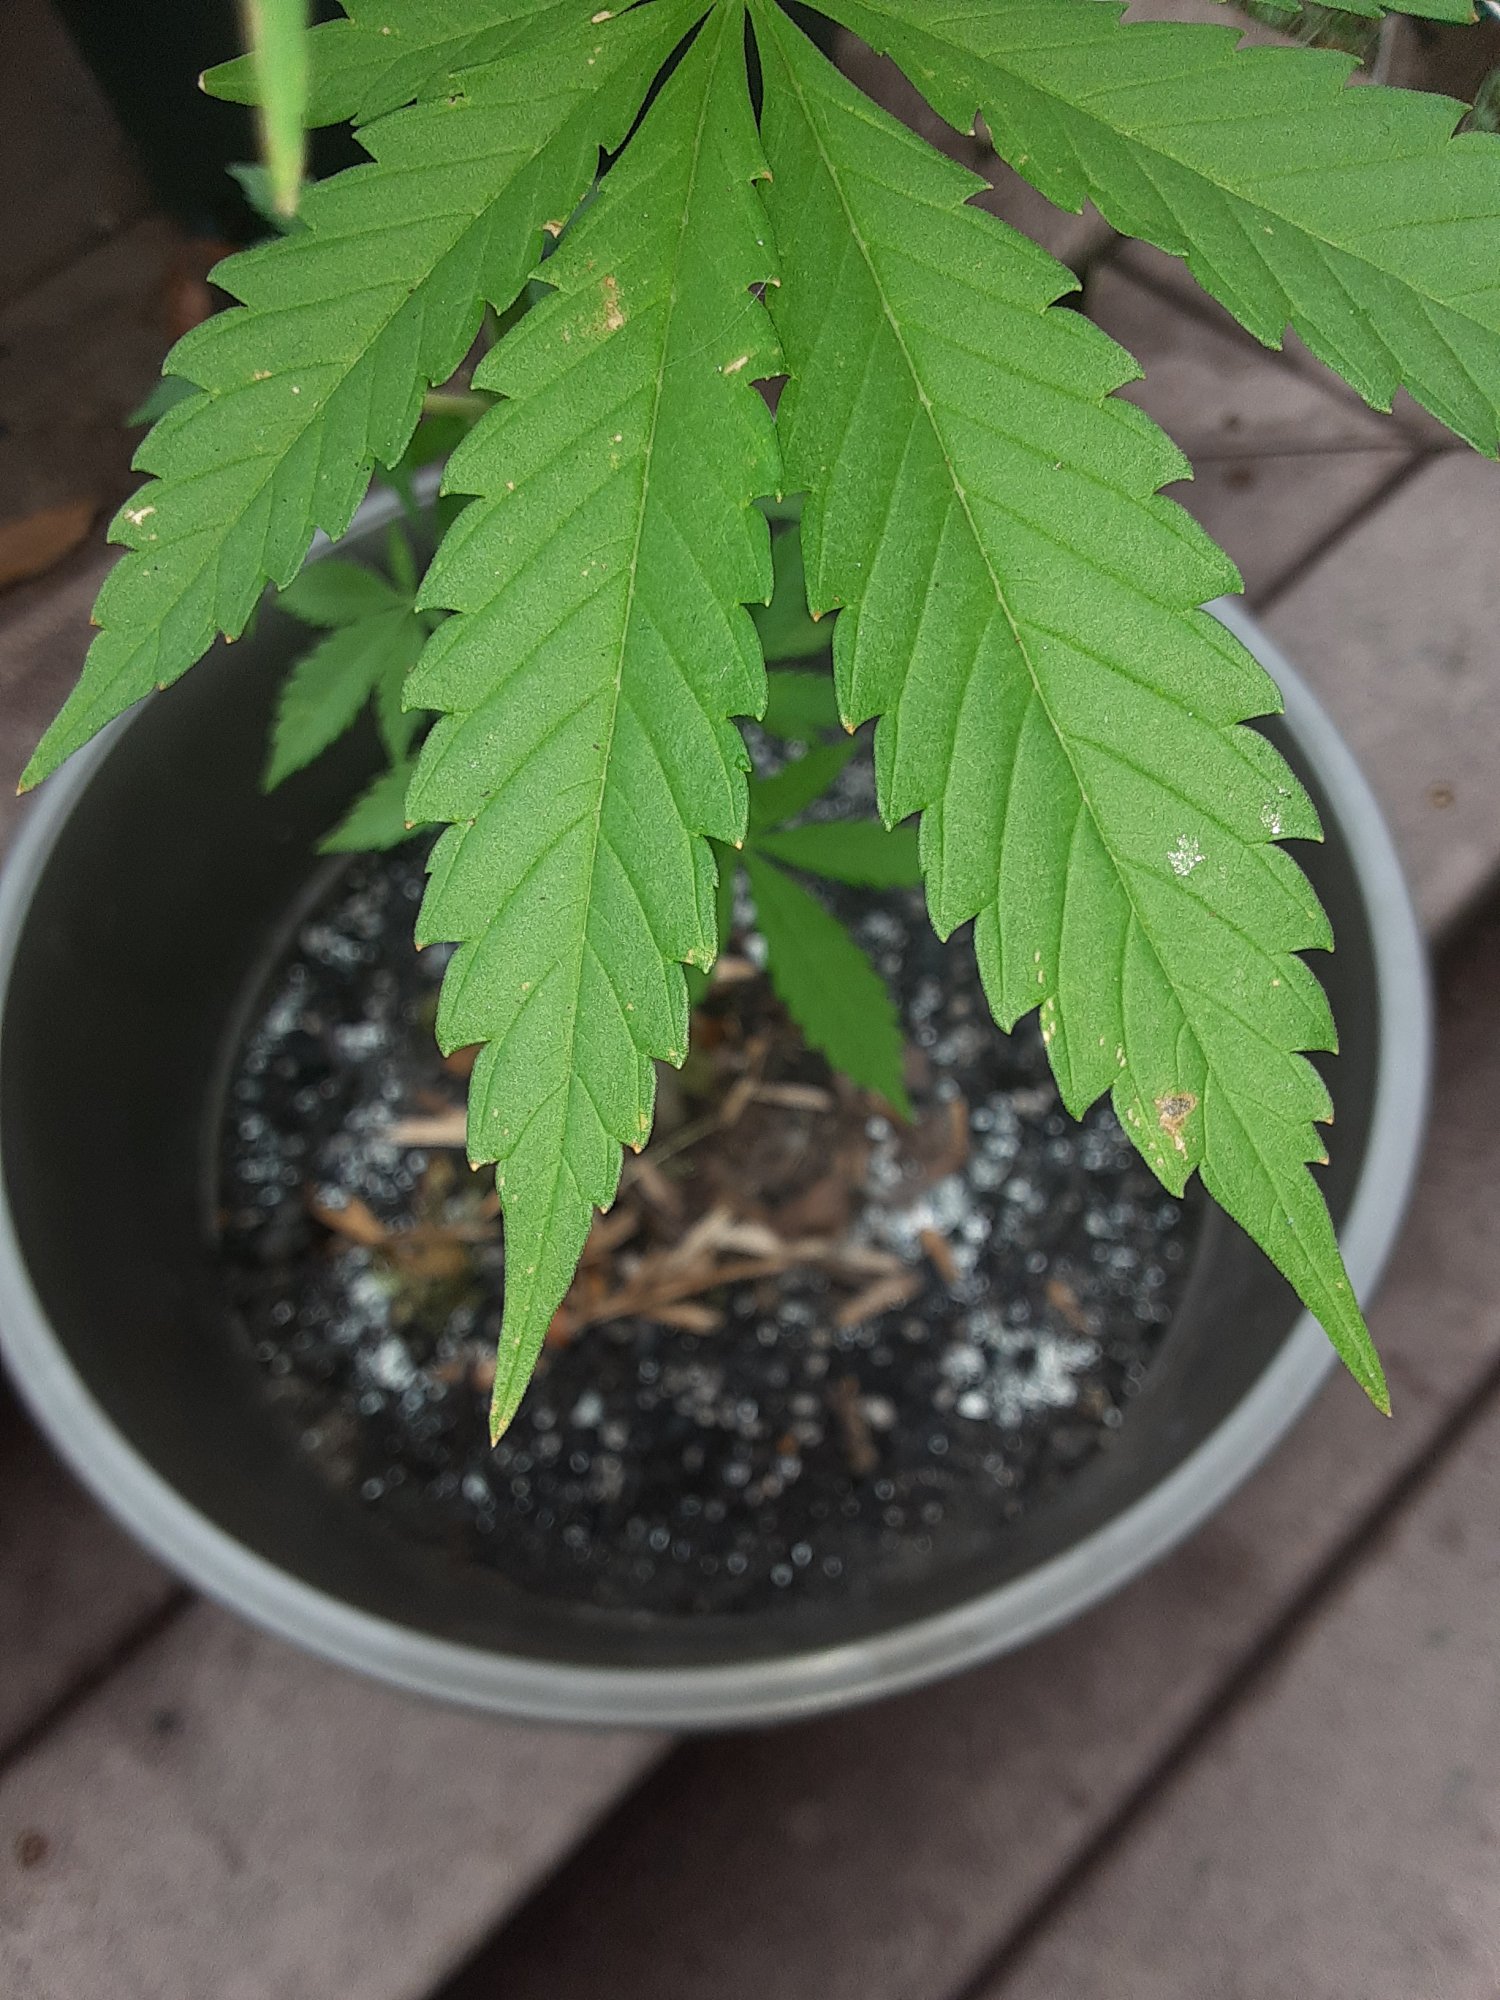 Leaf spots and growth questions